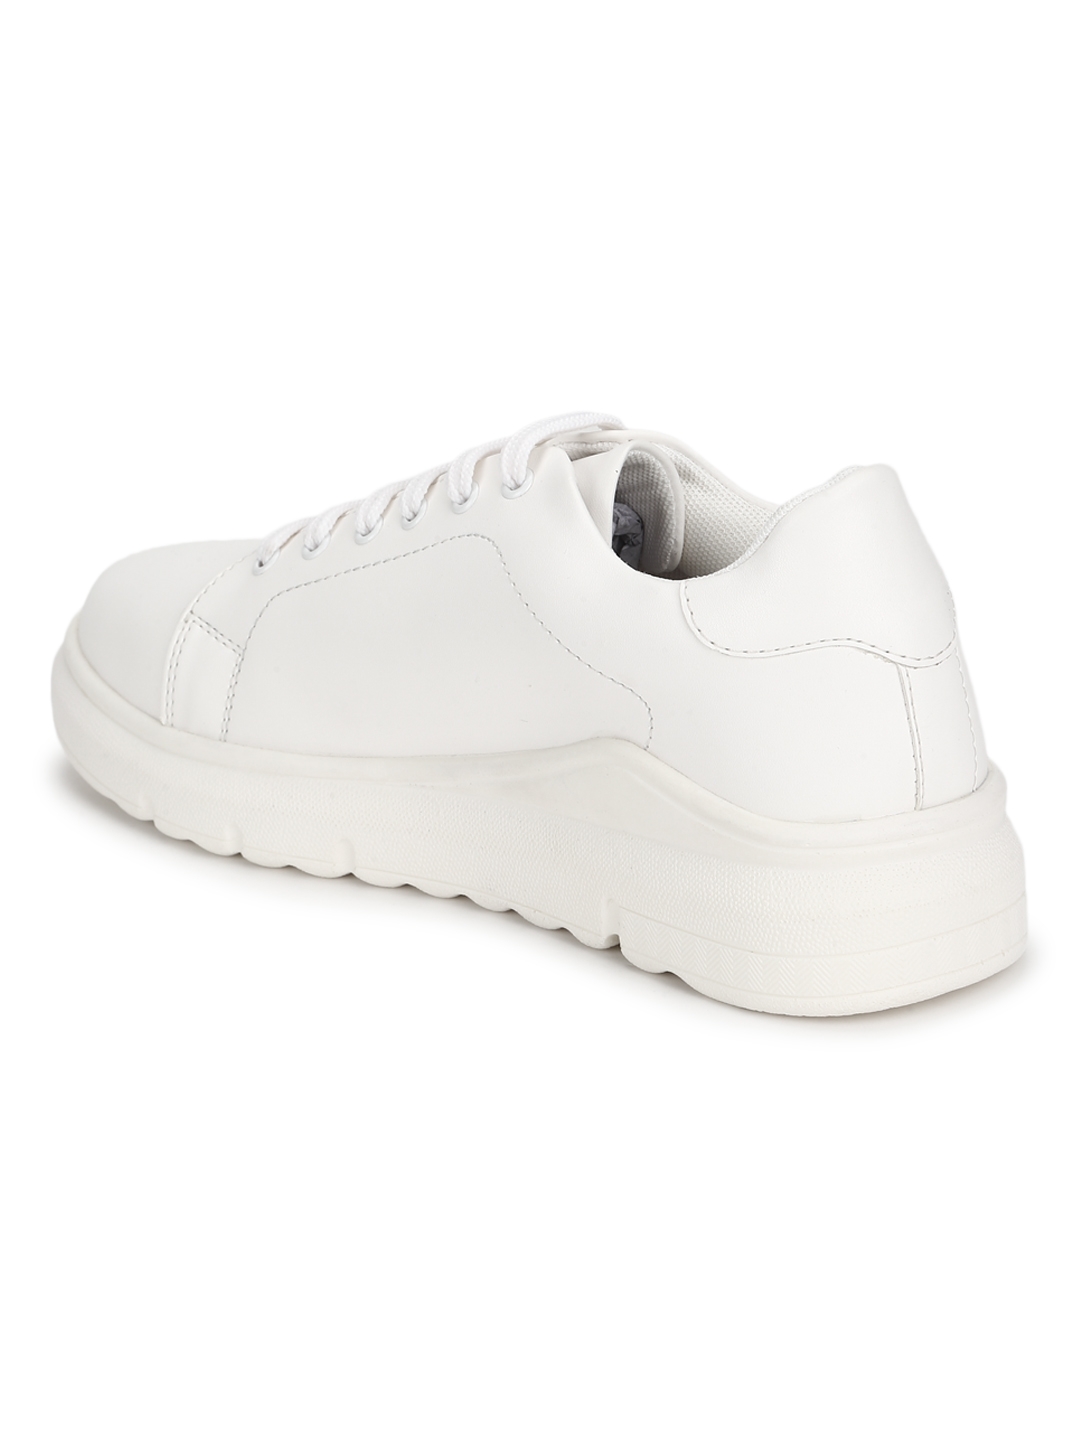 White PU Cleated Bottom Sneakers